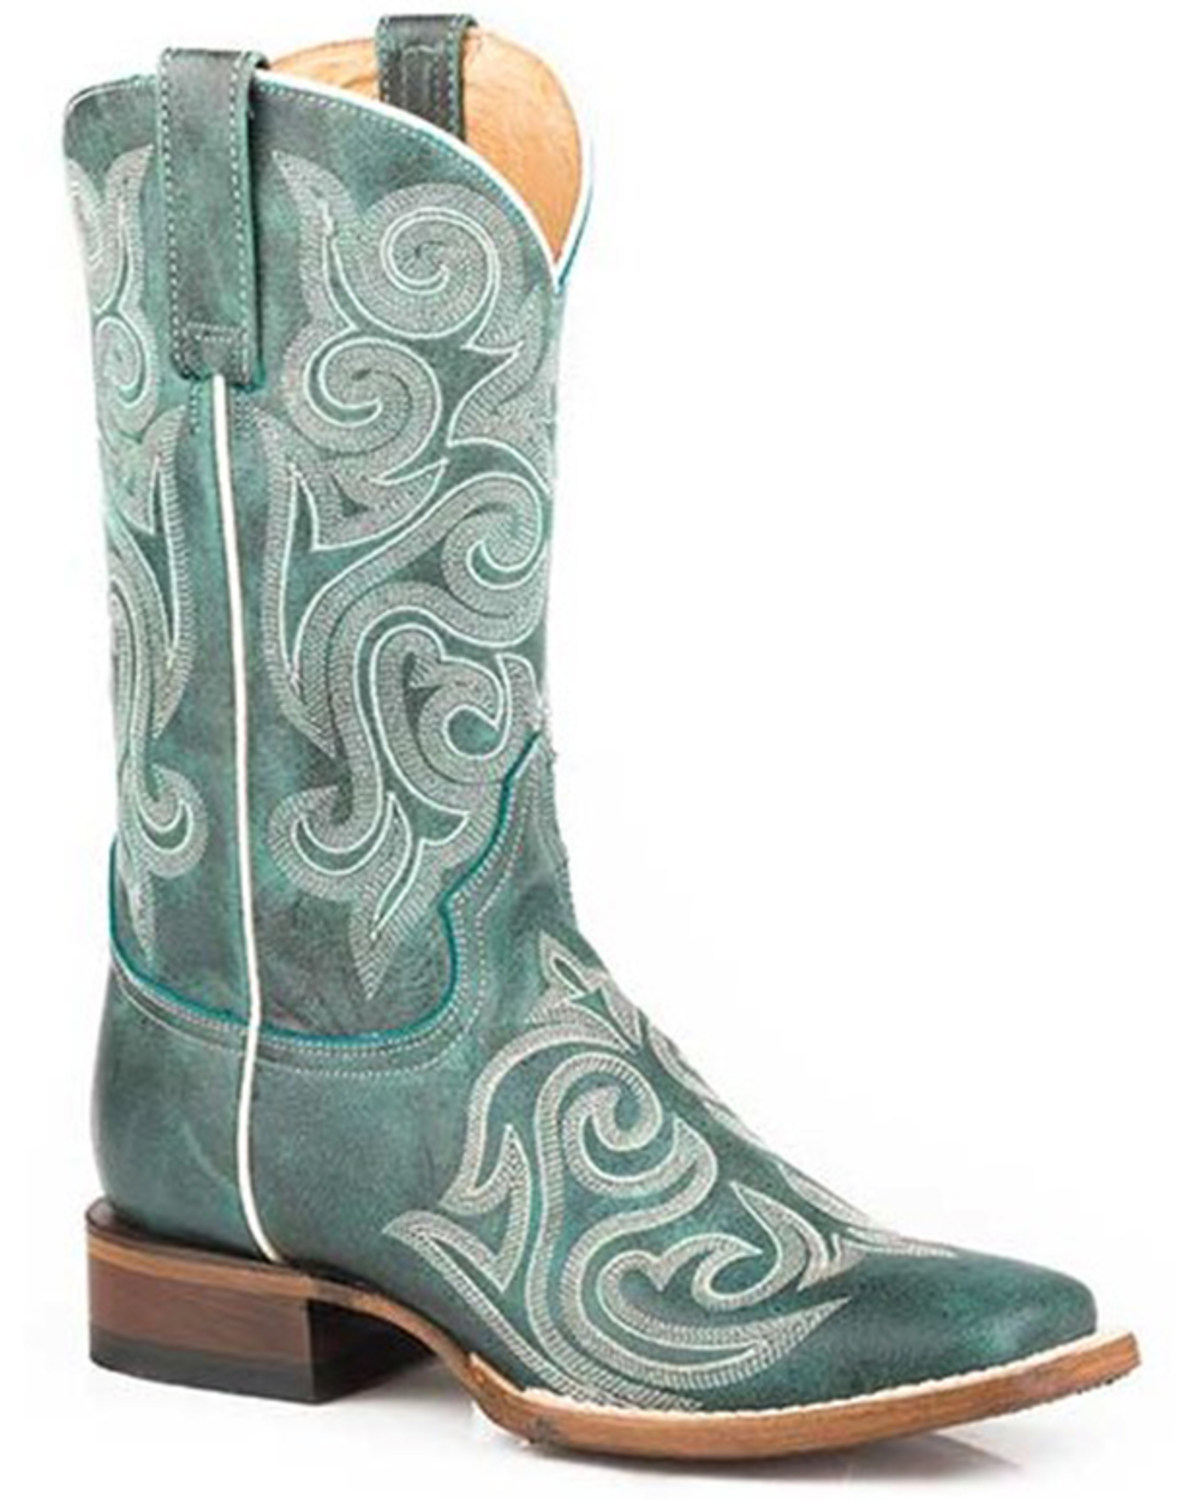 Roper Men's Blair Scroll Embroidered Vintage Western Boots - Square Toe